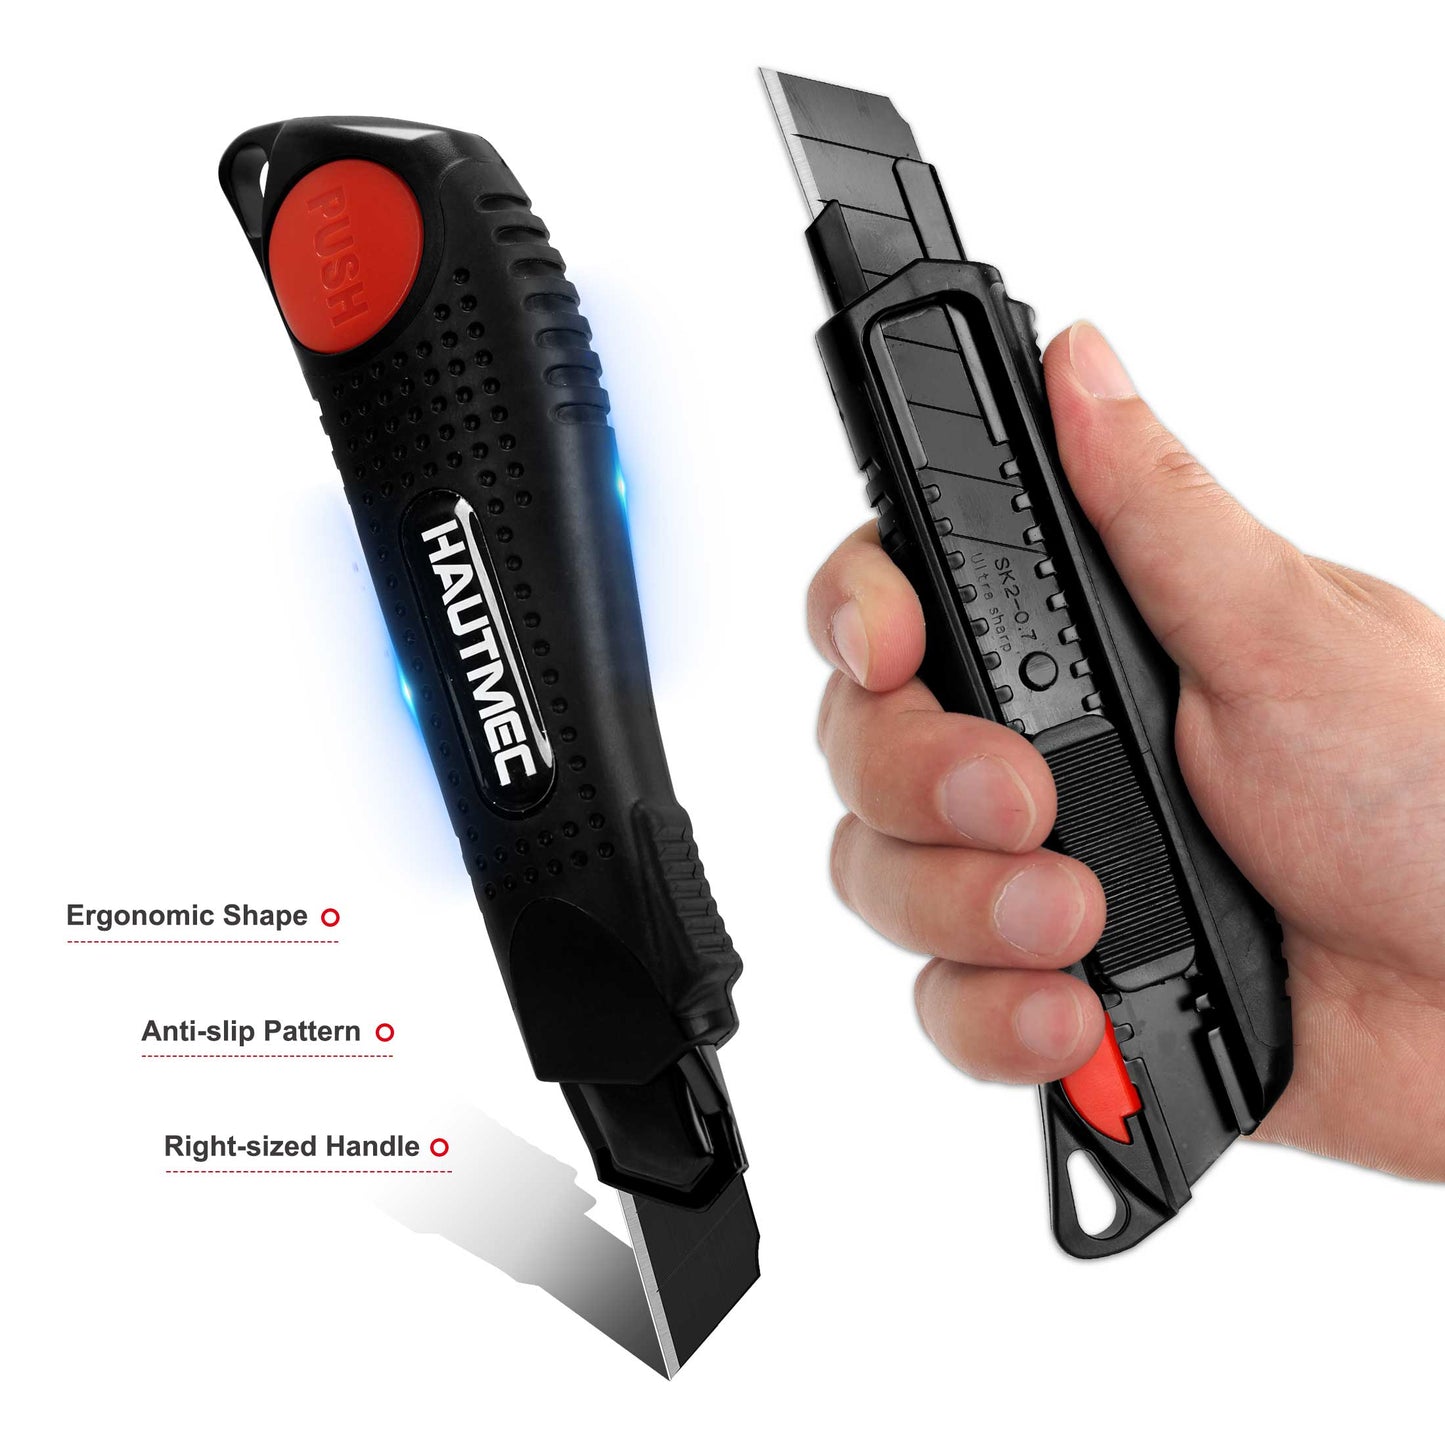 HAUTMEC 2PCS 18mm Utility Knife Box Cutter with Safety Quick Change Button, Snap off Black SK2 Ultra Sharp Blade, Anti-Slip Ergonomic Rubber Handle for Leather, Rubber, Cartons, Boxes HT0081-2PC